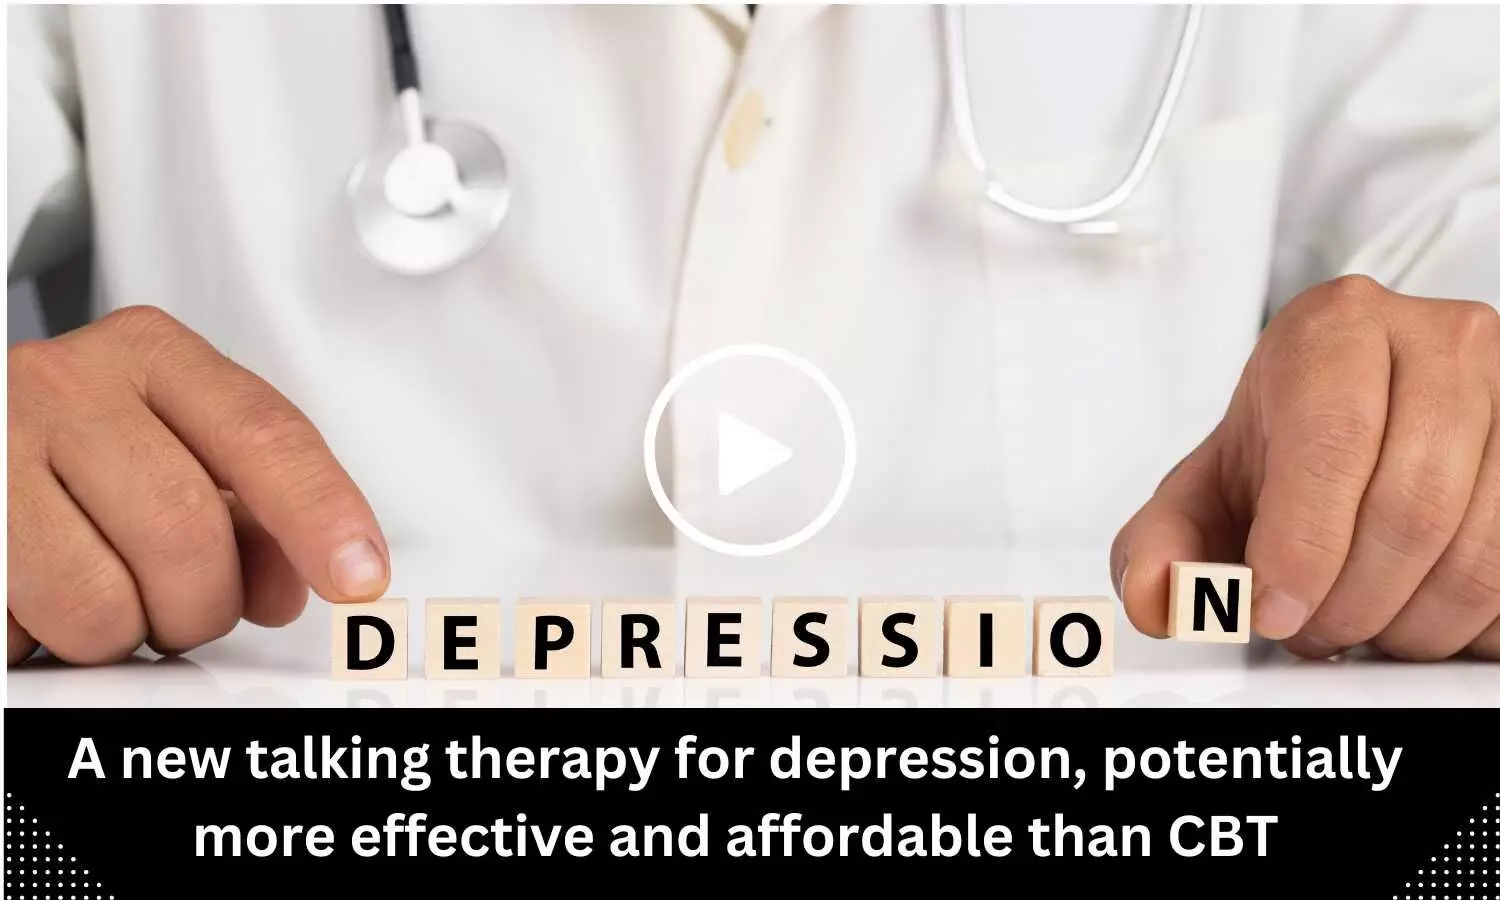 A new talking therapy for depression, potentially more effective and affordable than CBT